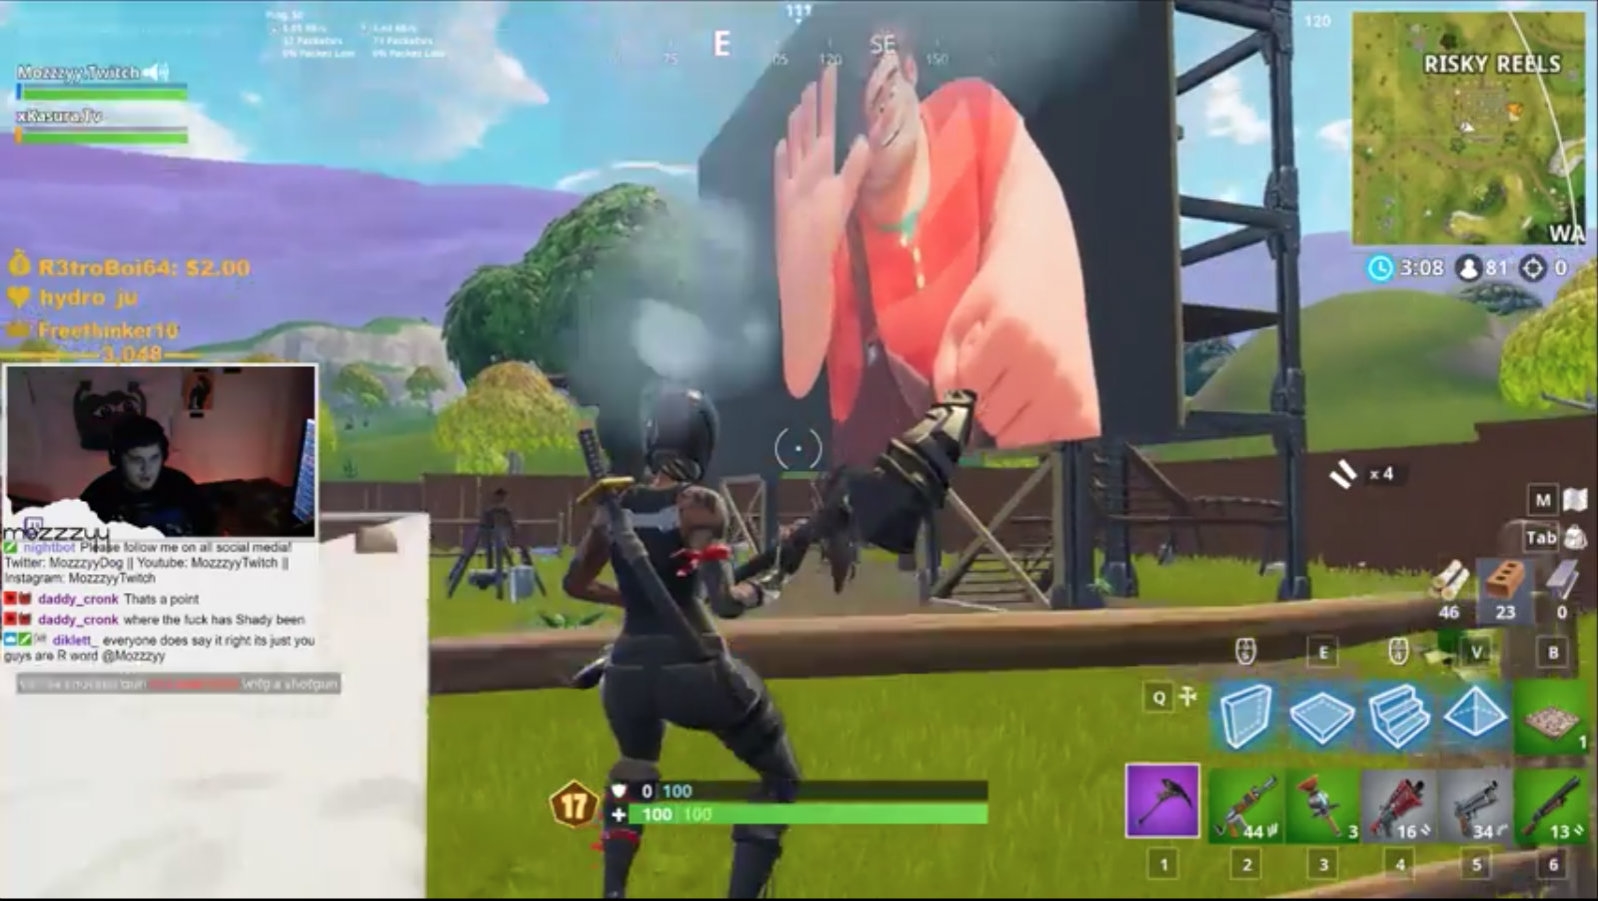 Wreck-it Ralph comes to 'Fortnite' | DeviceDaily.com